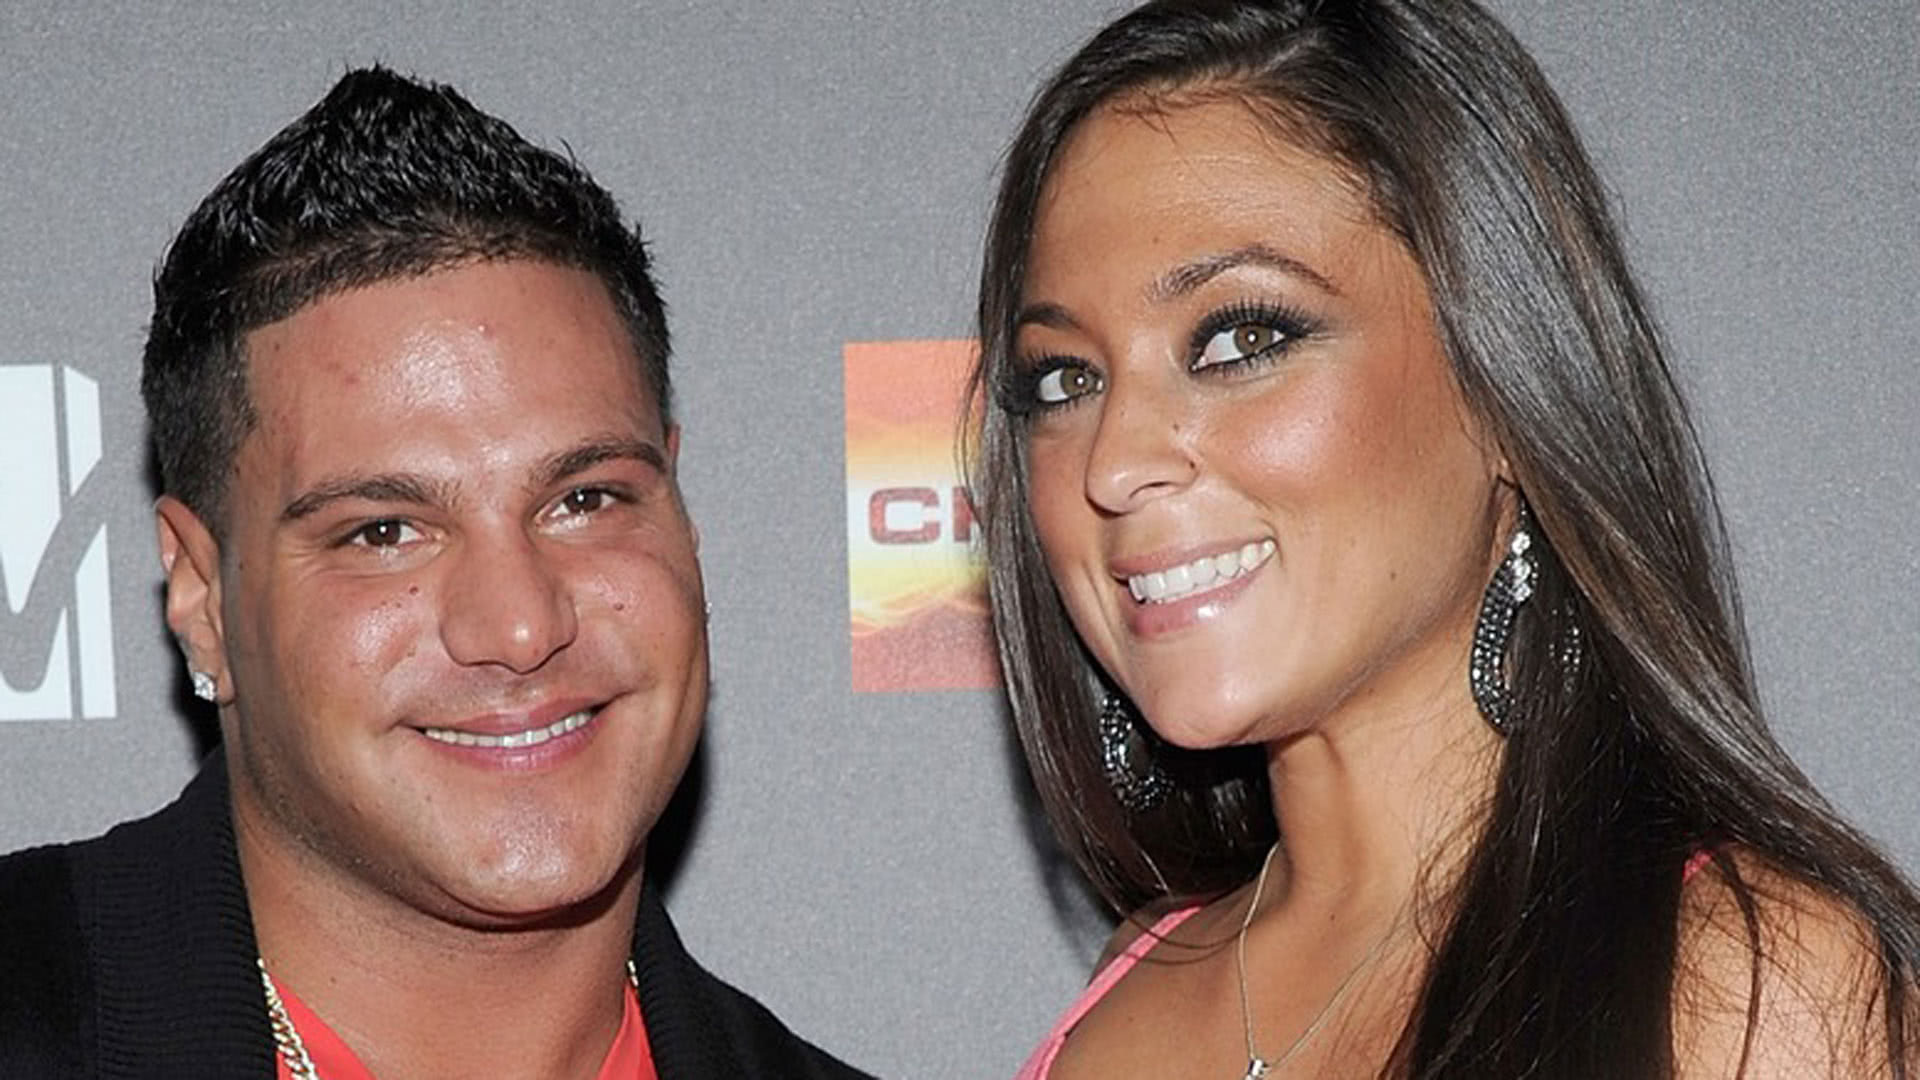 Whatever Happened To Ronnie And Sammi After The Jersey Shore?